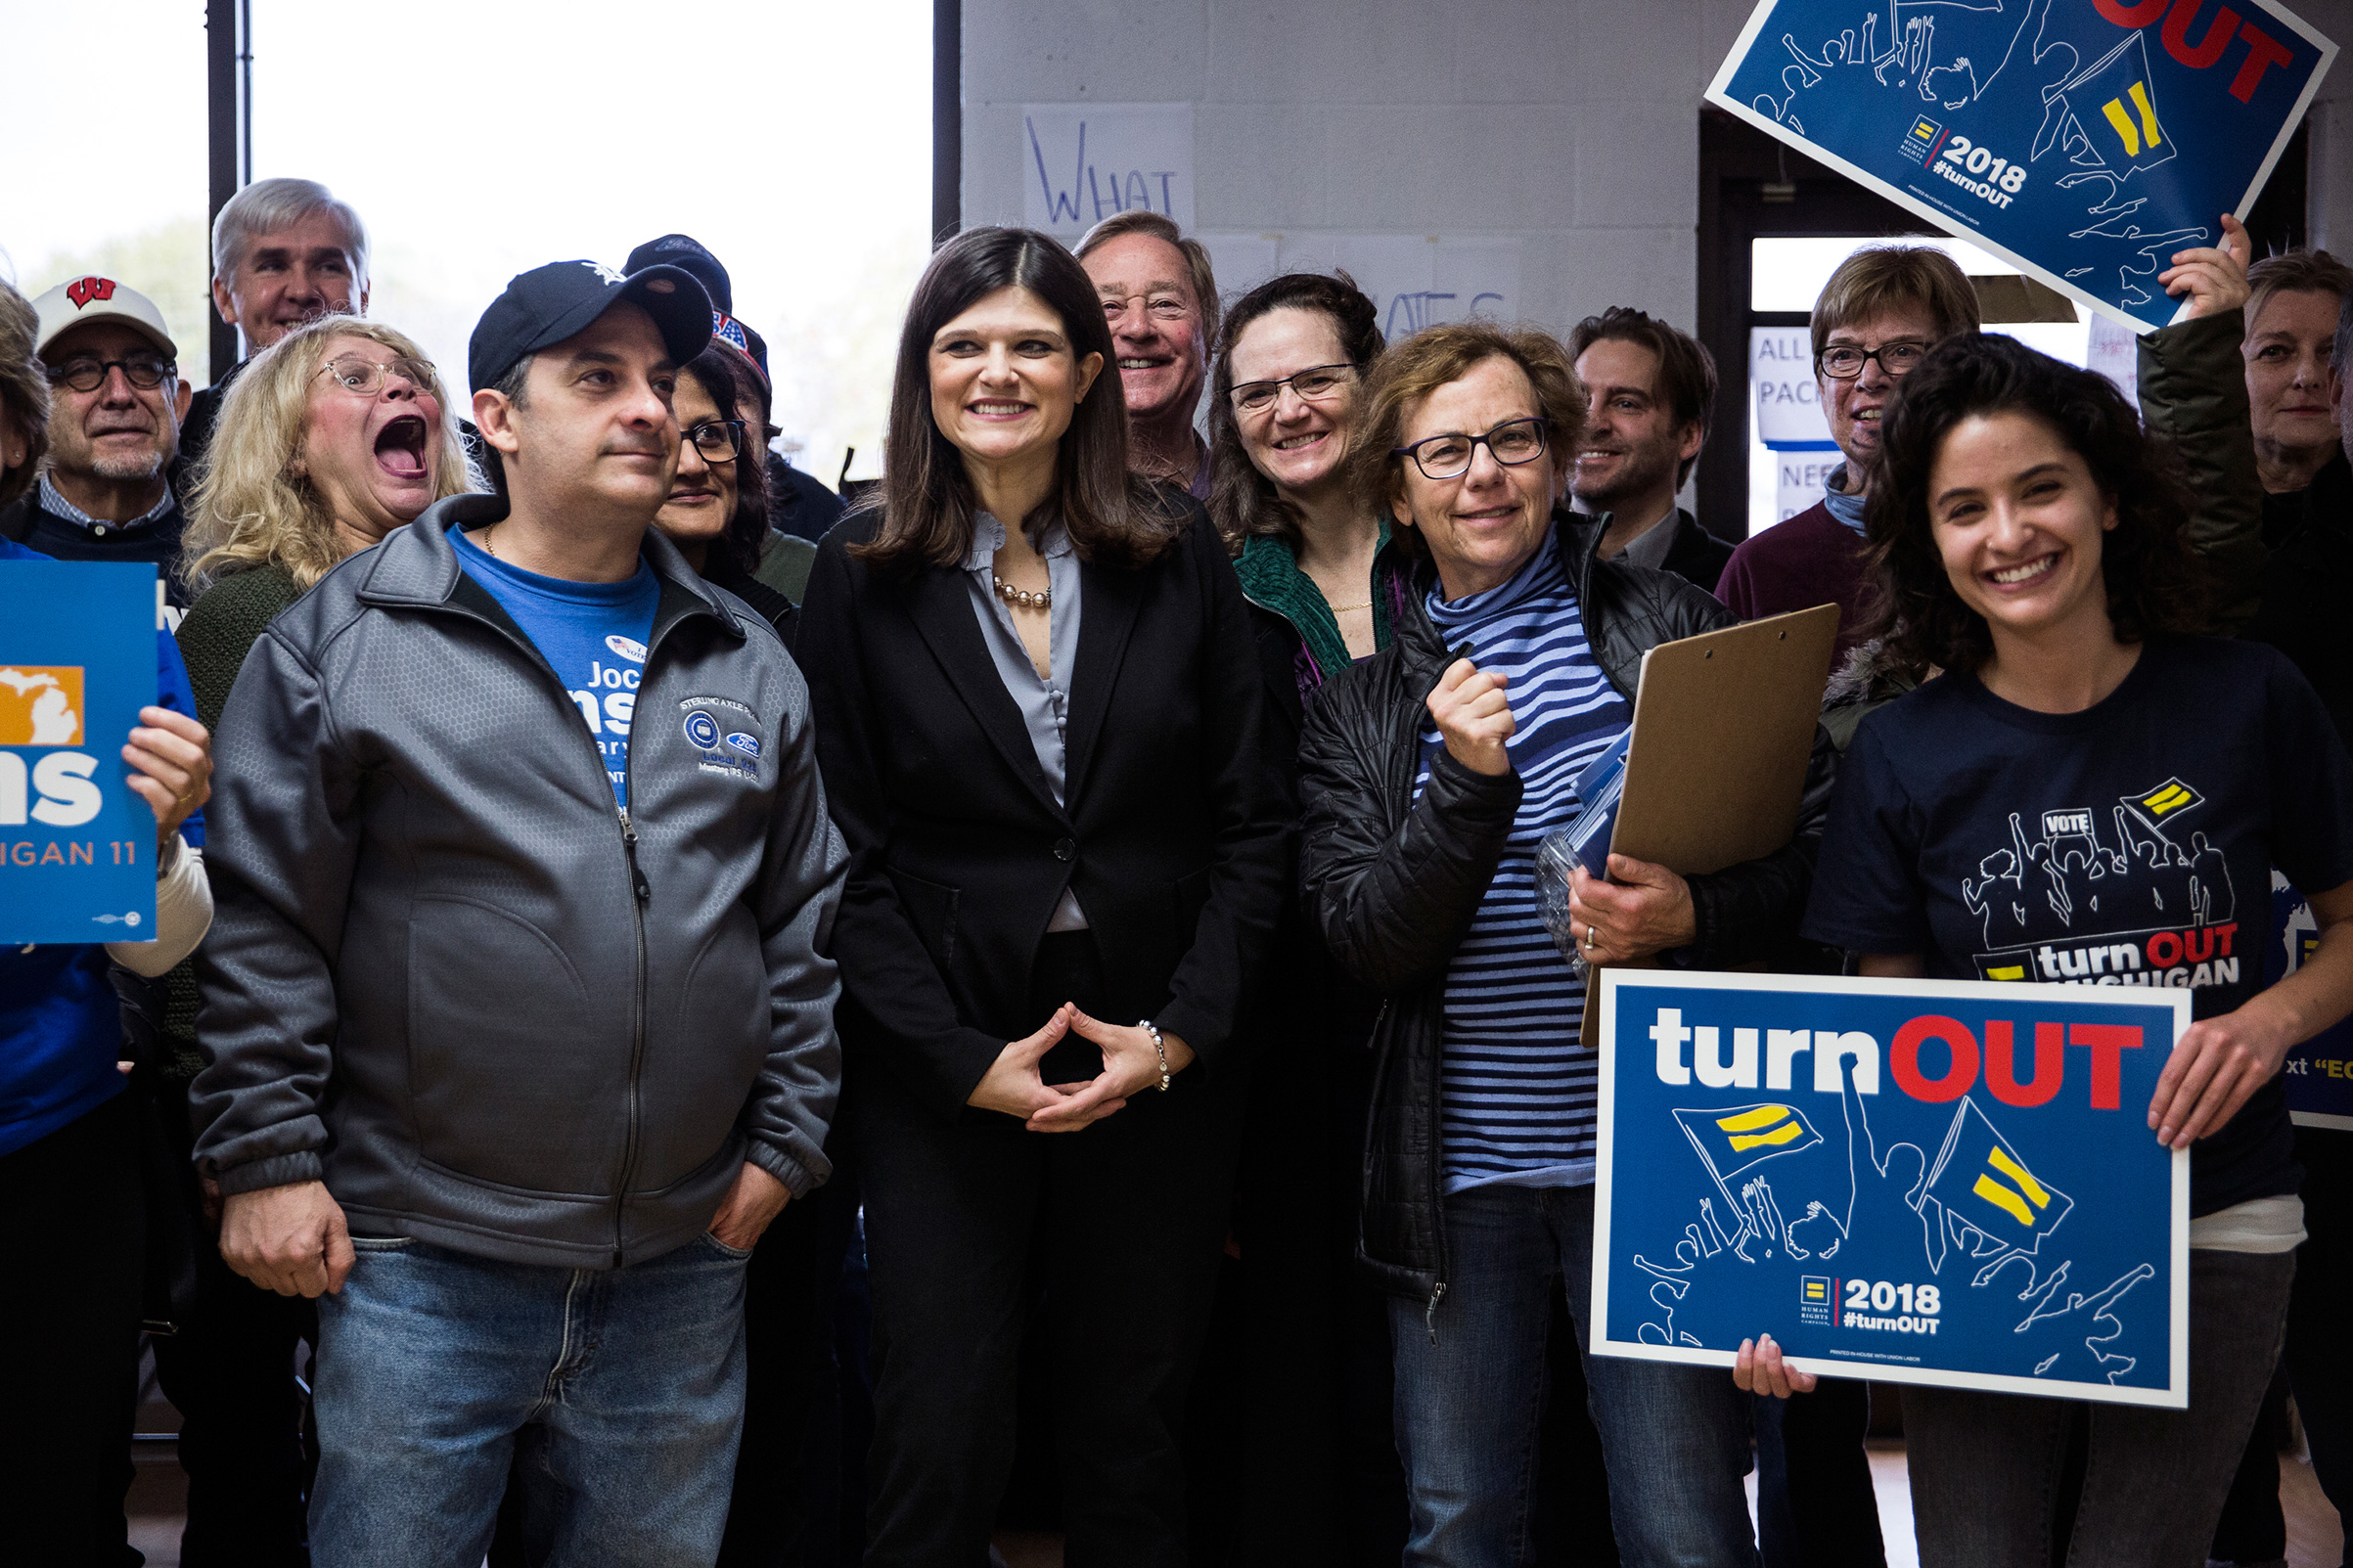 Democratic candidate for Michigan's 11th Congressional District Haley Stevens, center, poses for a picture with supporters and volunteers while launching election day canvassing at Stevens' Field Office in Troy, Mich, on Nov. 6, 2018. (Erin Kirkland for TIME)